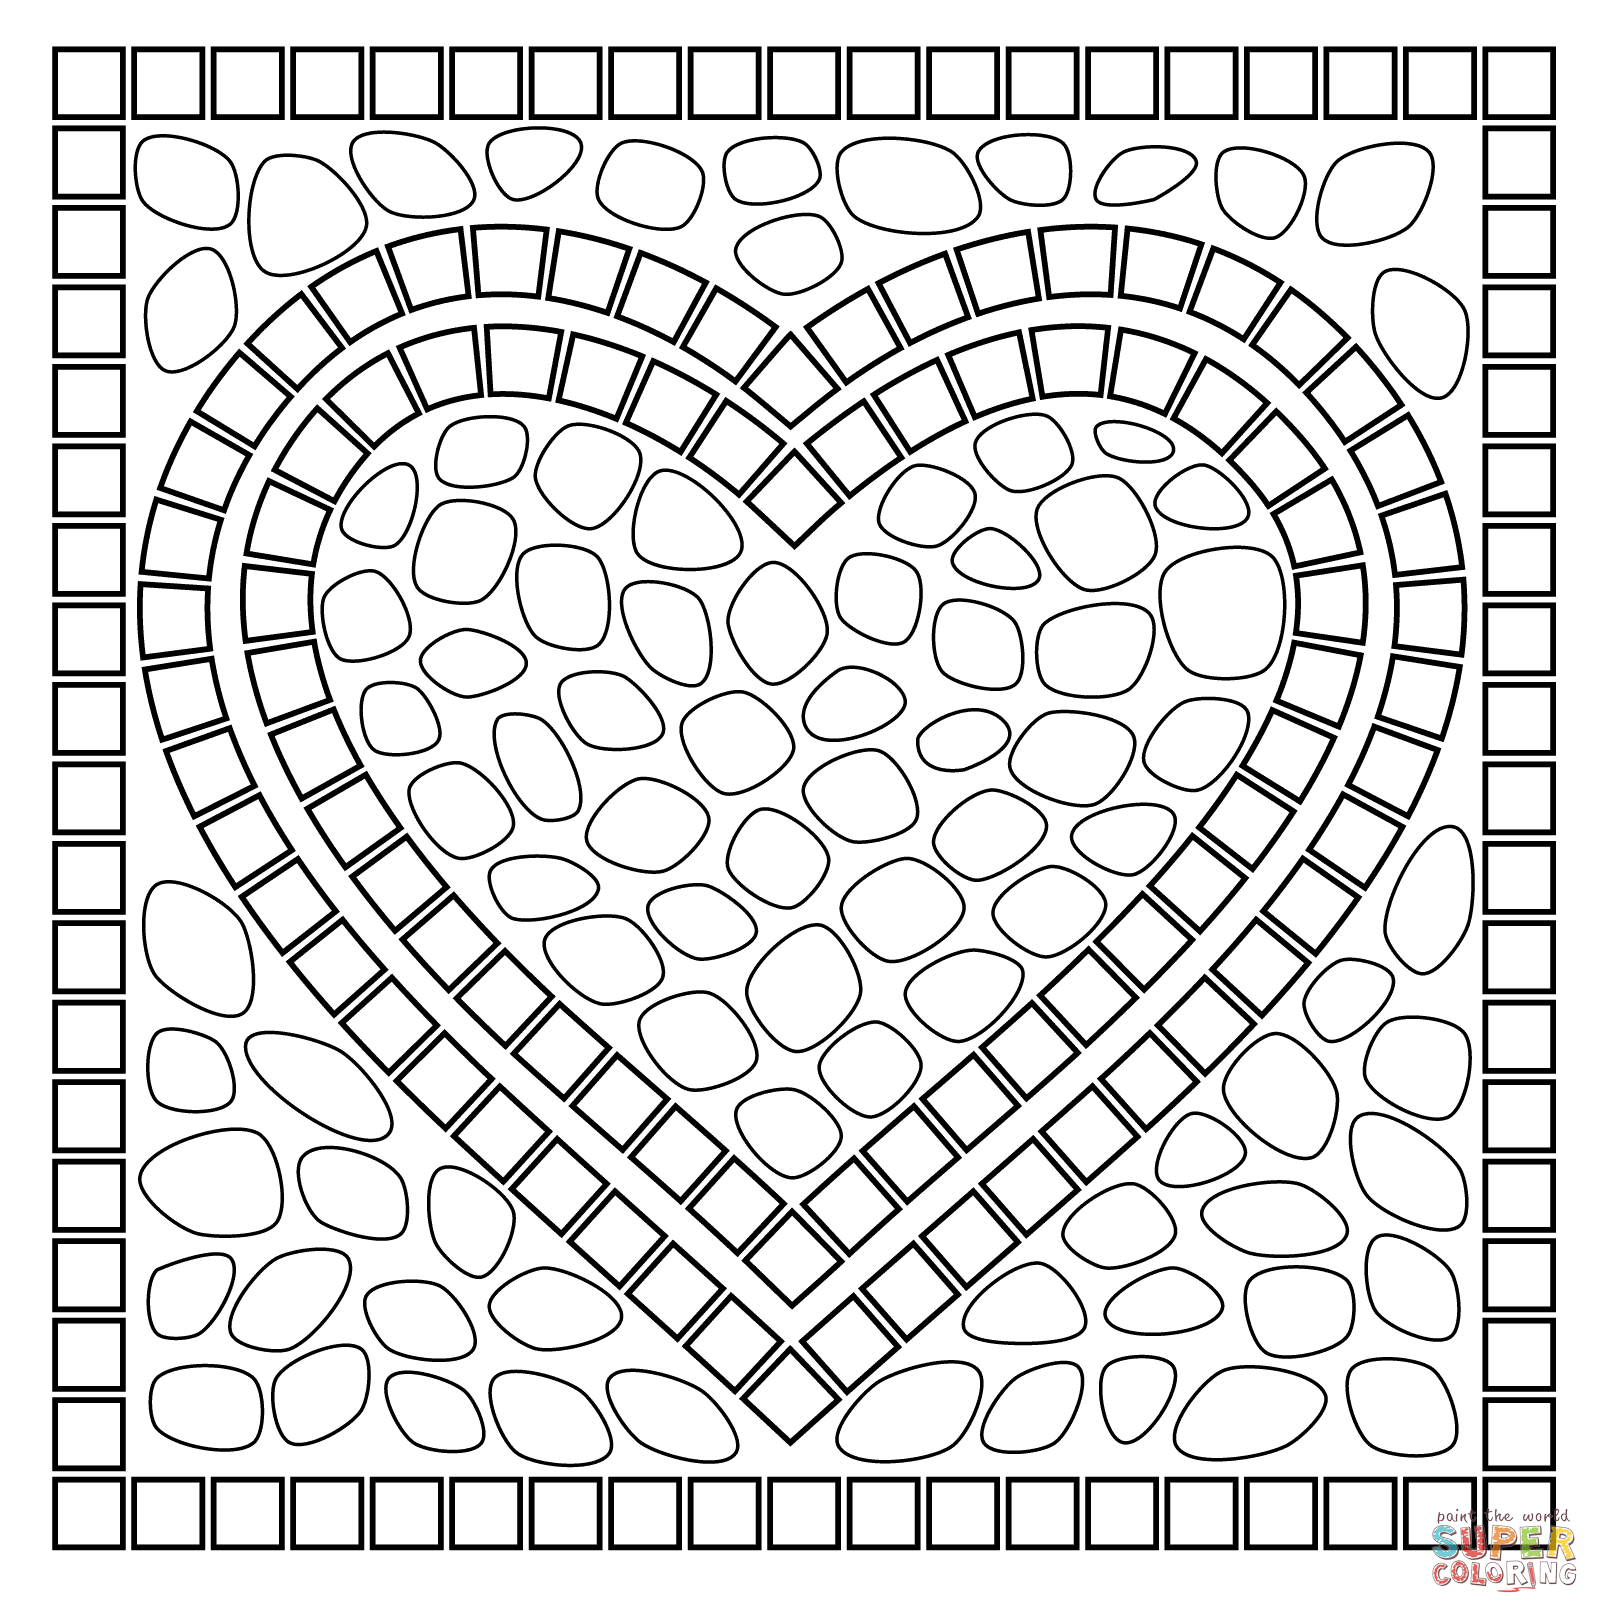 mosaic designs to color mosaic patterns coloring pages coloring home to designs mosaic color 